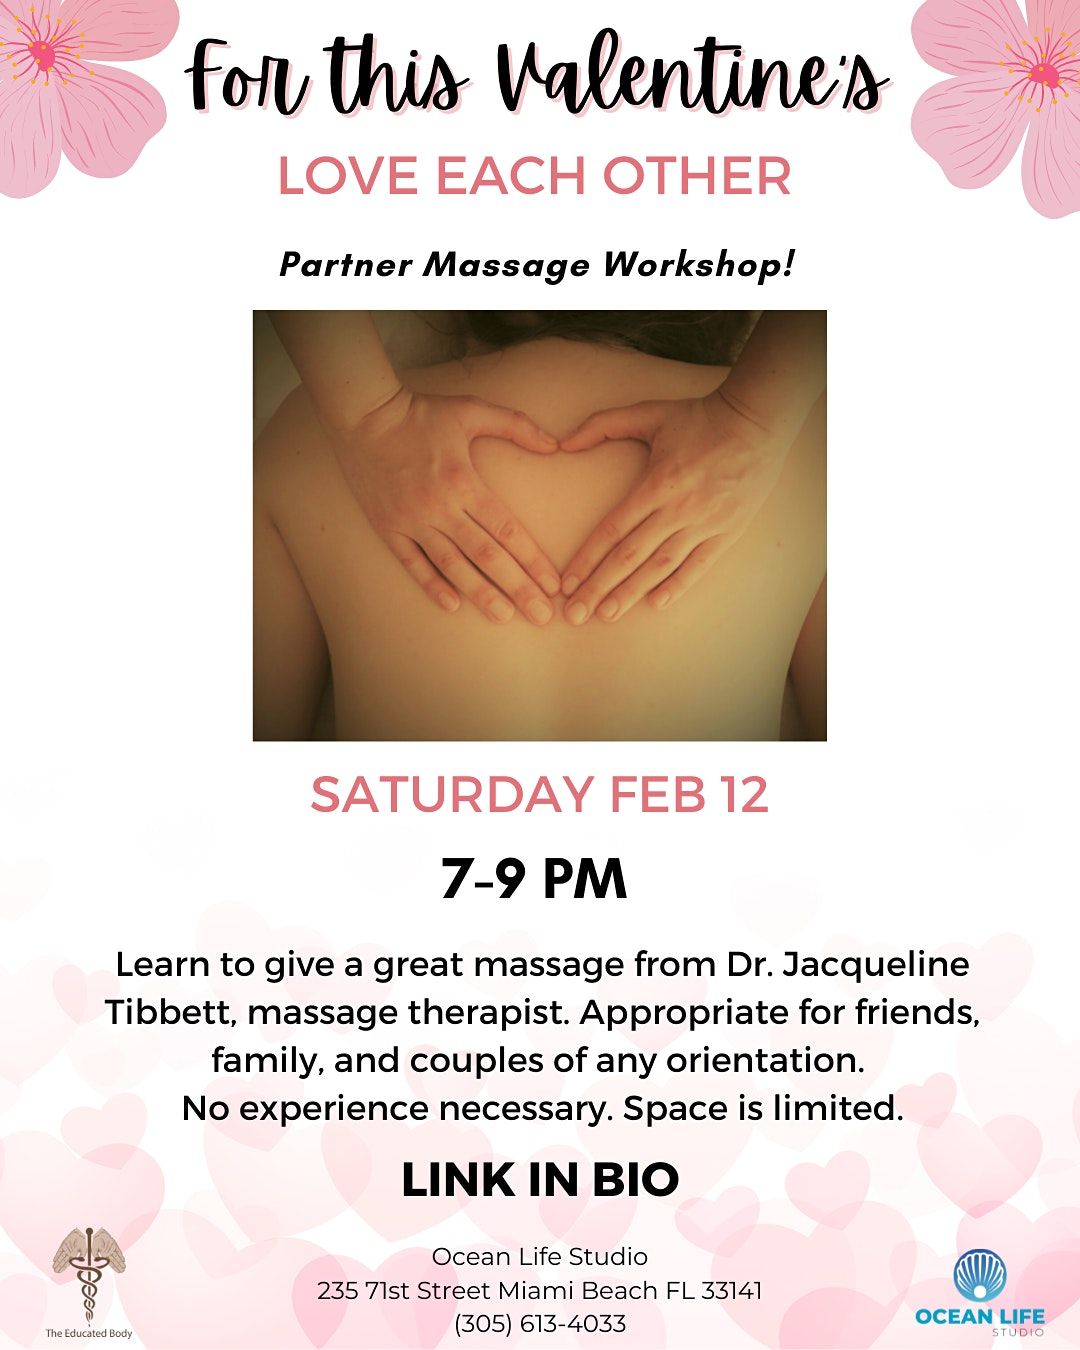 Love Each Other: Learn to give each other a great massage!